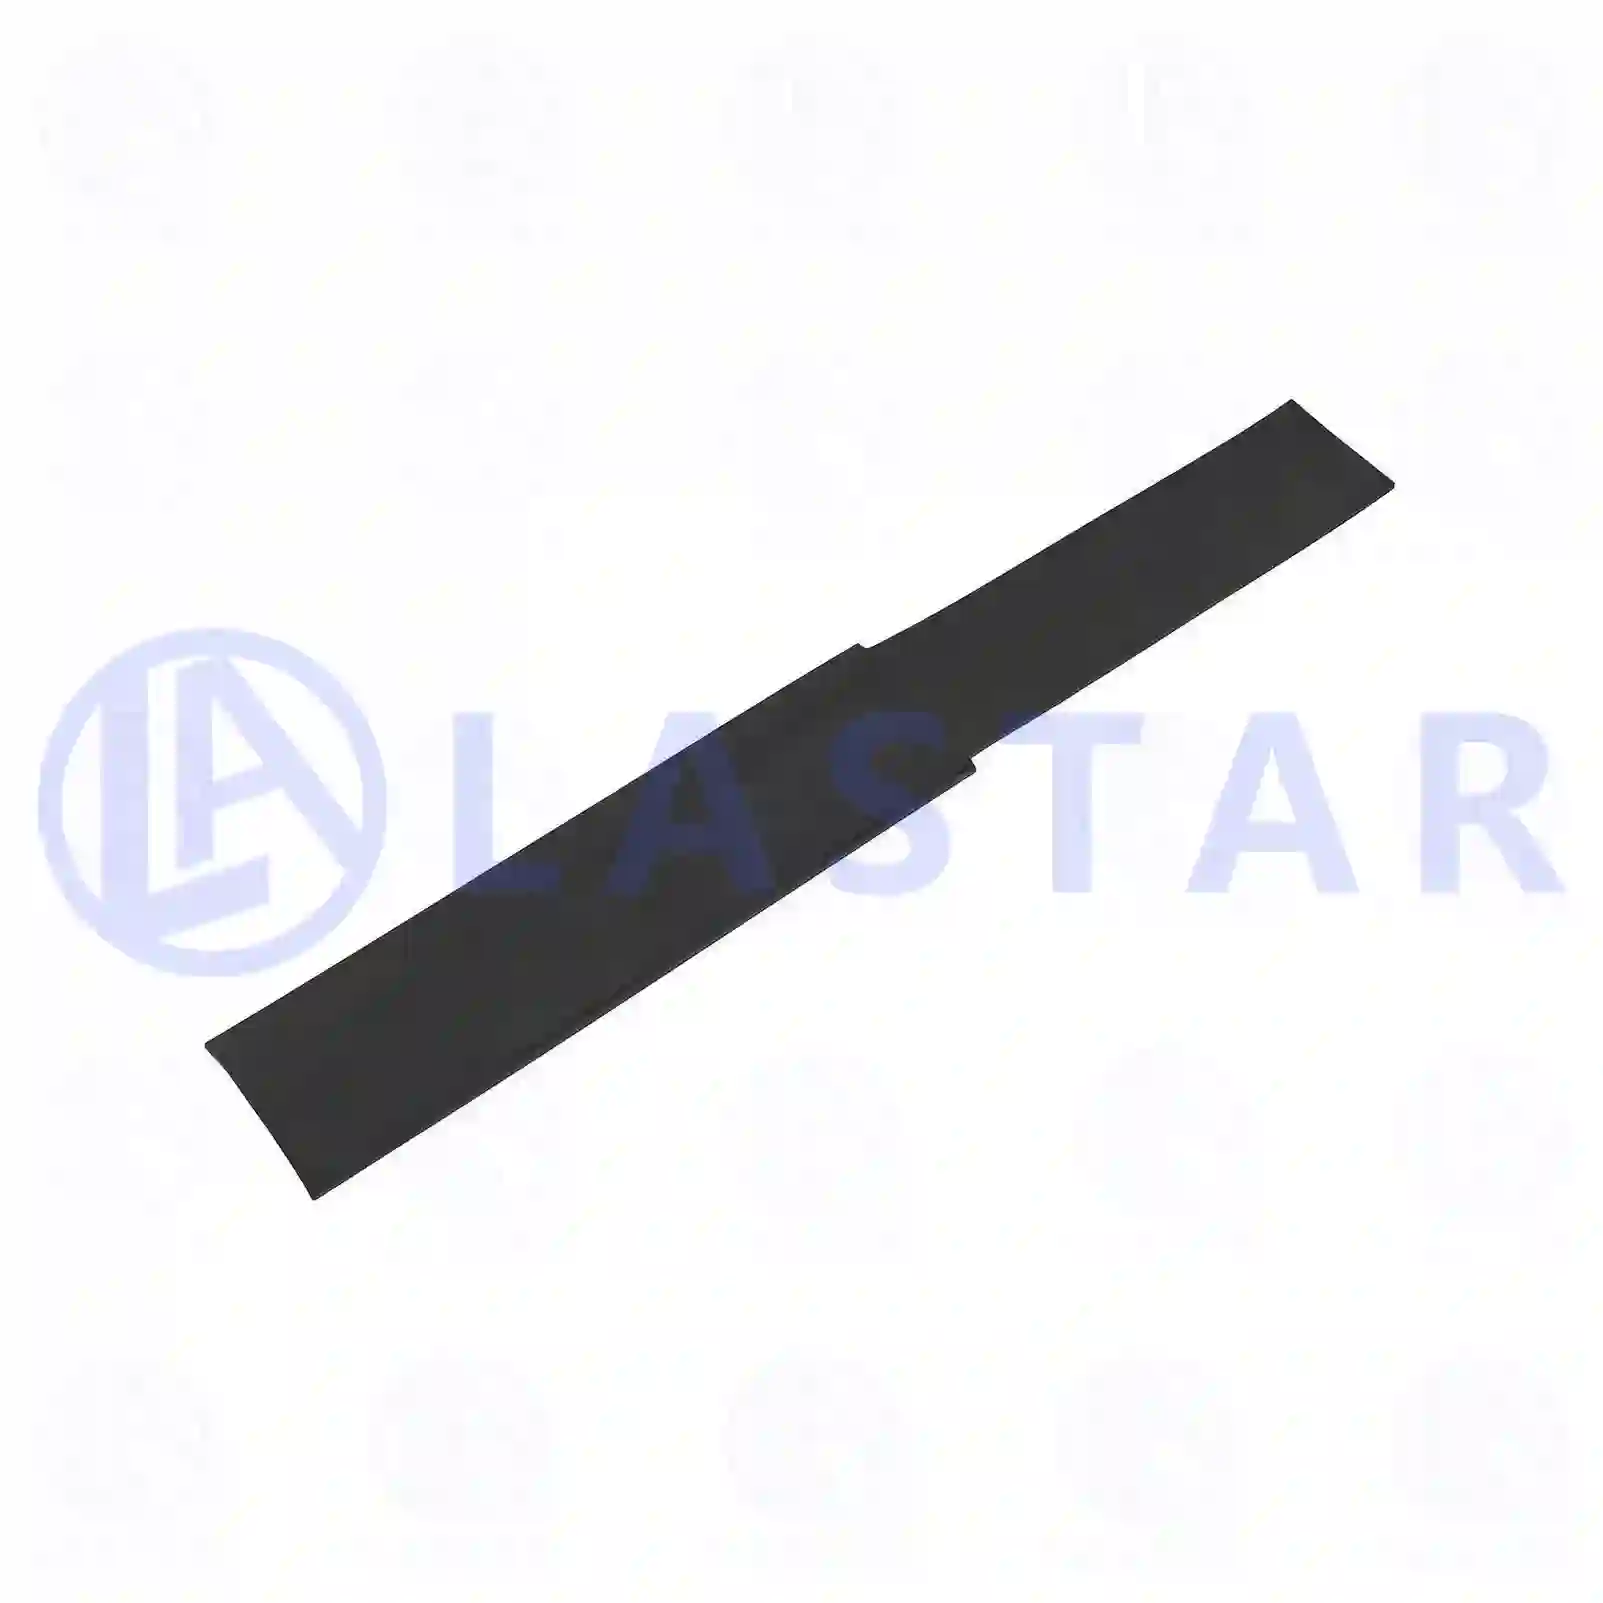 Tensioning band, 77717772, 1540598, 1728630, ZG50815-0008 ||  77717772 Lastar Spare Part | Truck Spare Parts, Auotomotive Spare Parts Tensioning band, 77717772, 1540598, 1728630, ZG50815-0008 ||  77717772 Lastar Spare Part | Truck Spare Parts, Auotomotive Spare Parts